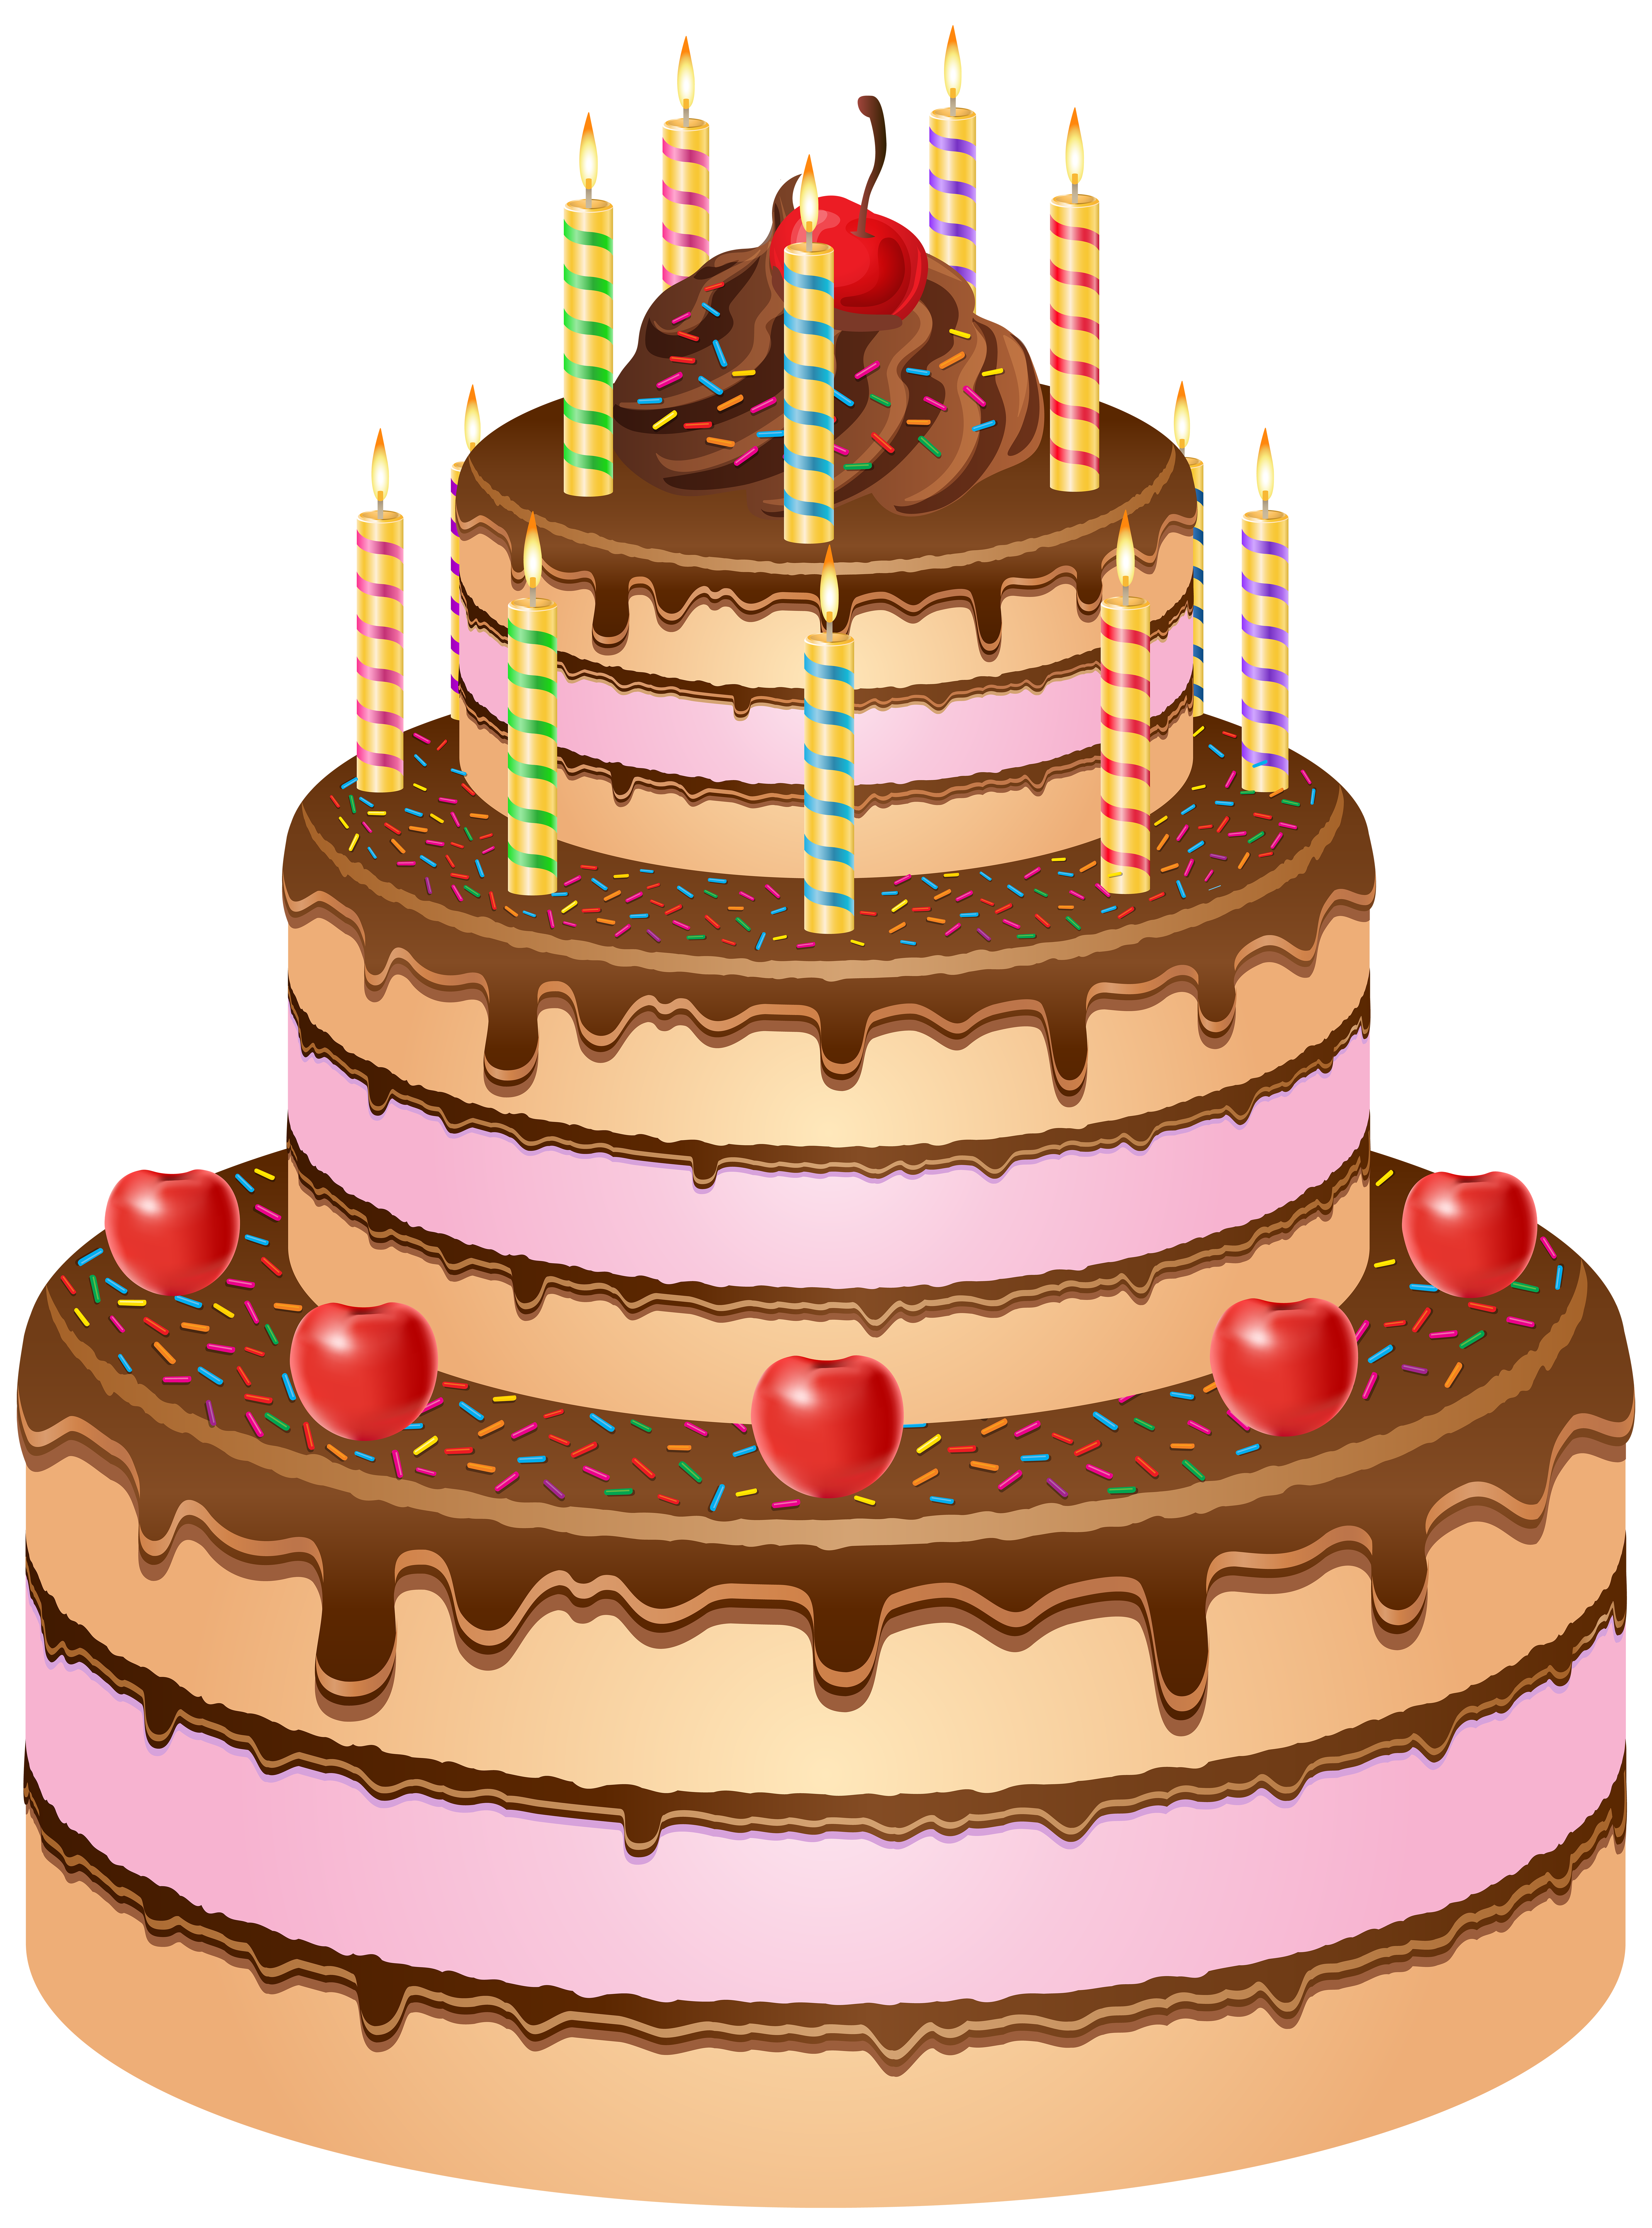 Birthday Cake PNG | PNG Mart